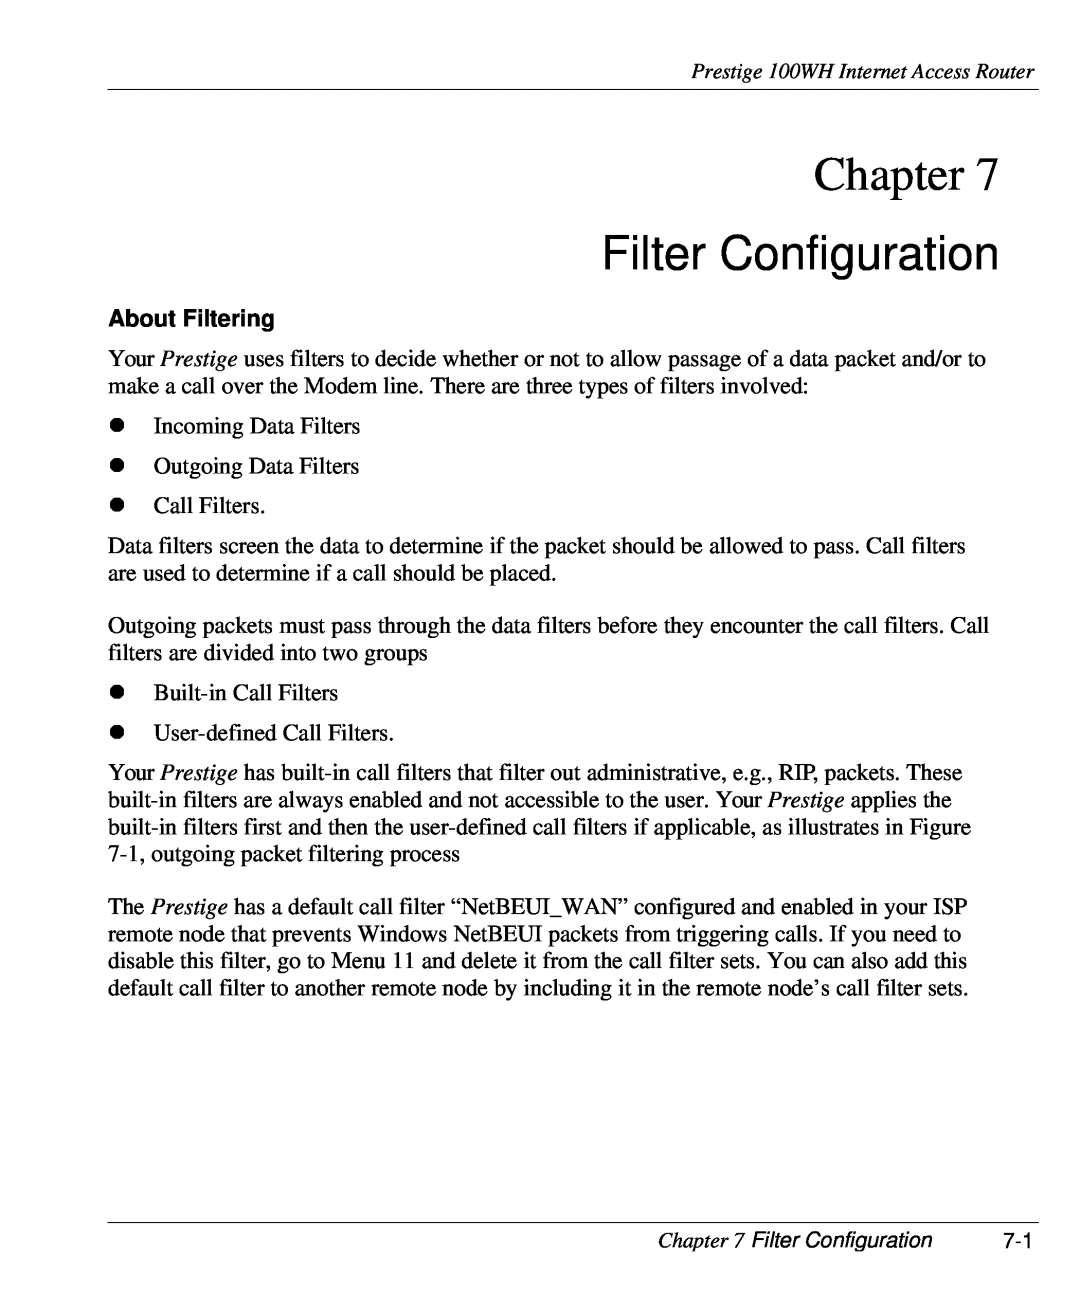 ZyXEL Communications 100WH user manual Filter Configuration, About Filtering, Chapter 